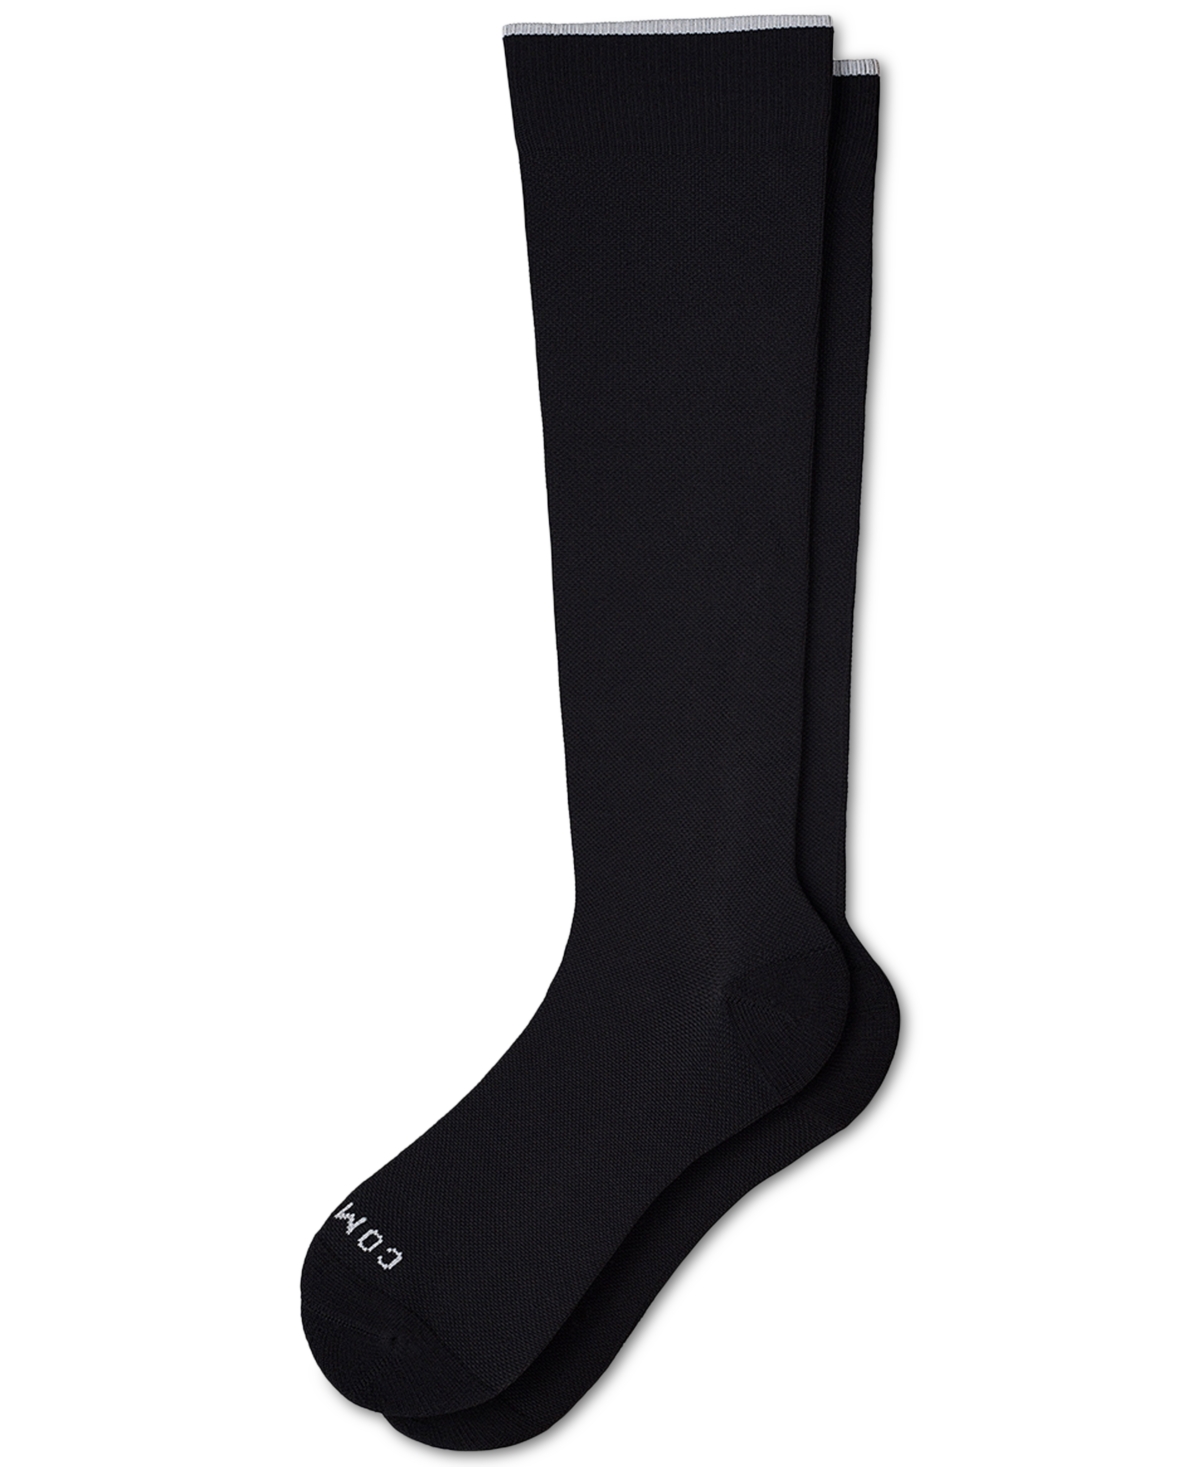 Comrad Knee-high Wicking Compression Socks In Black